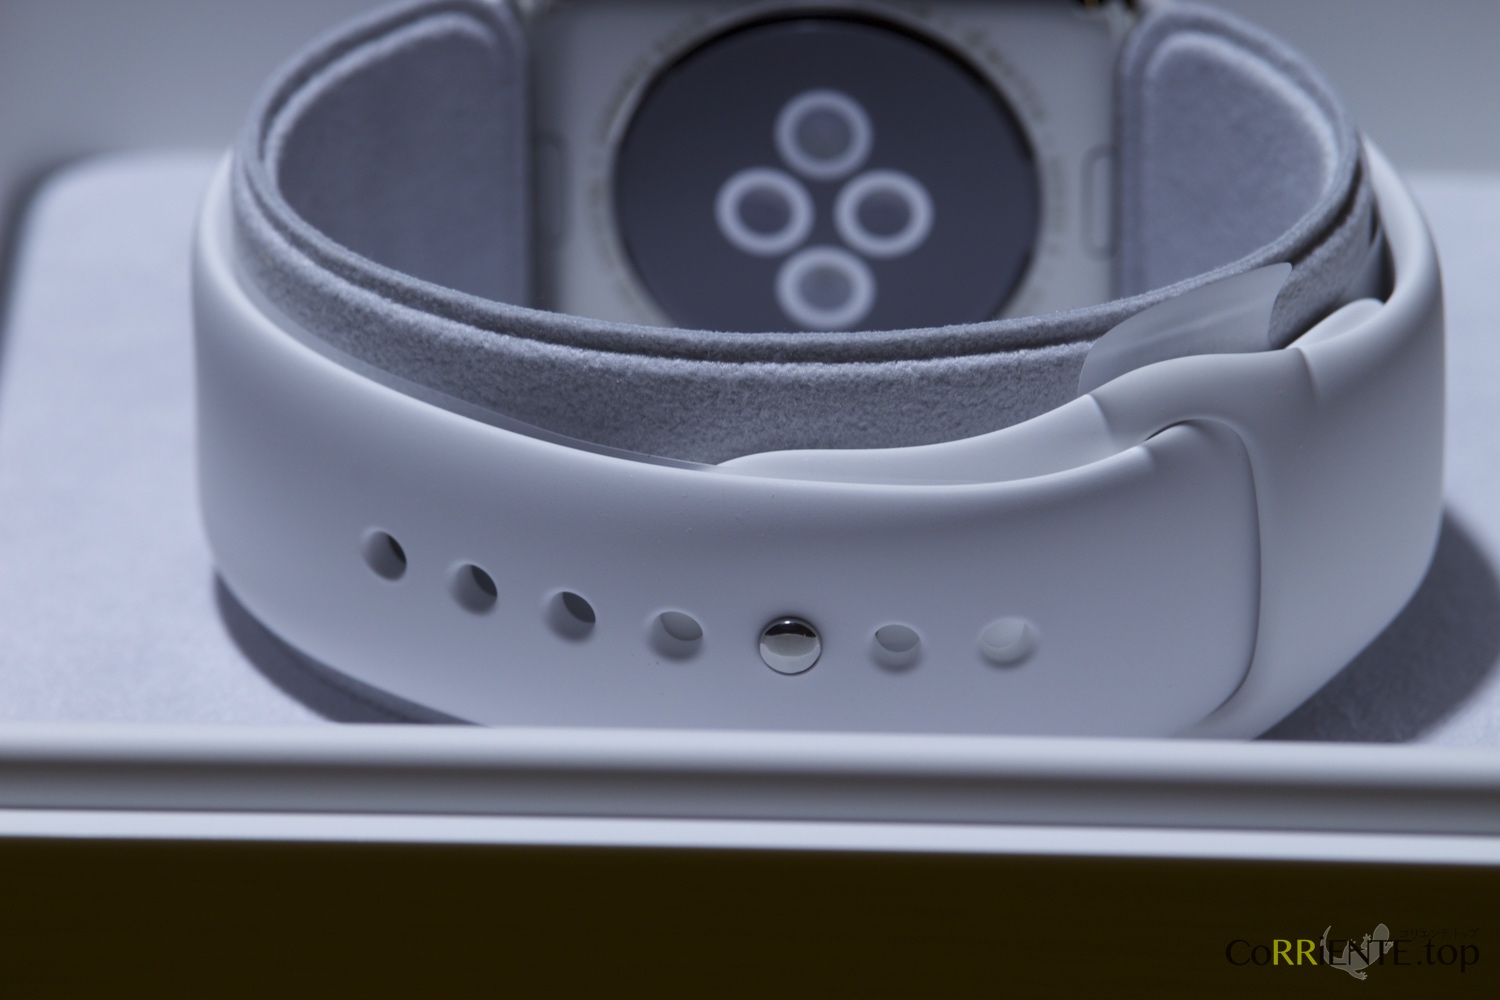 applewatch-review8